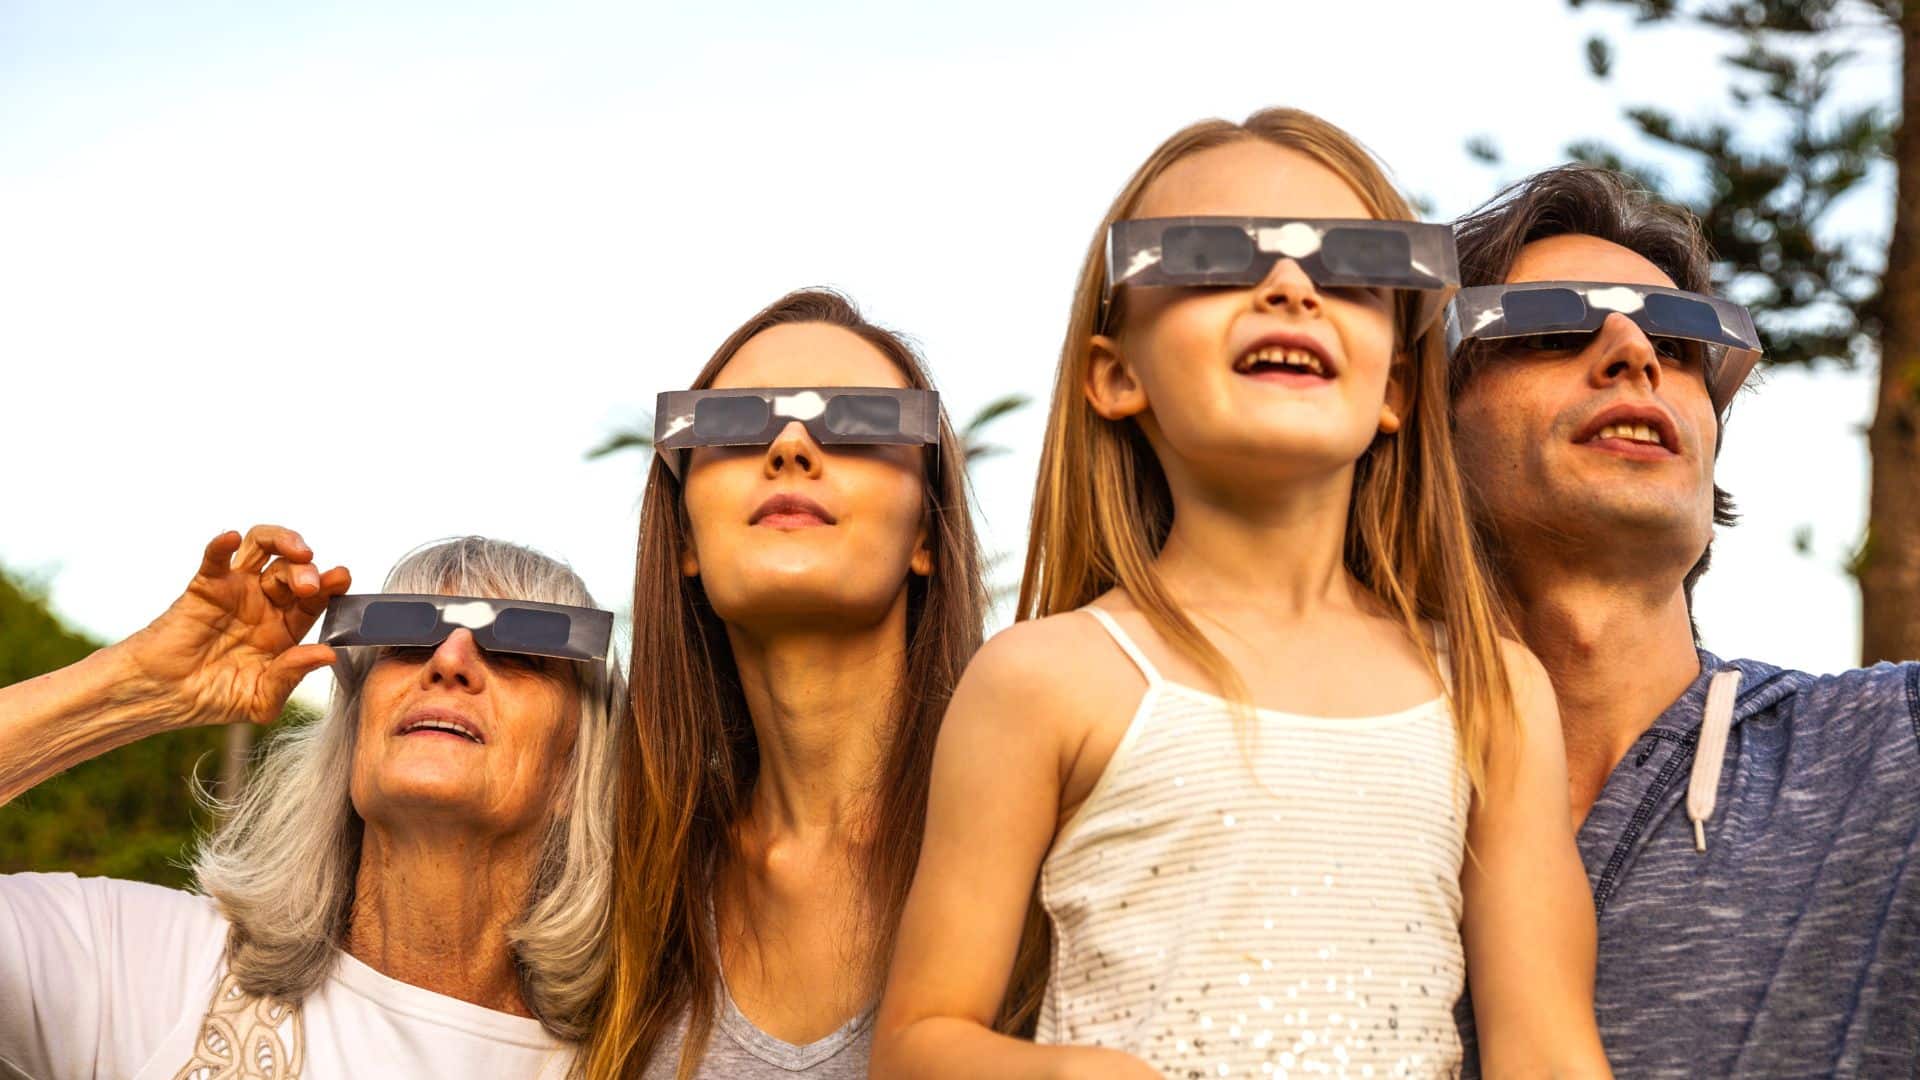 Photograph of a family looking up at the sky wearing solar eclipse glasses.